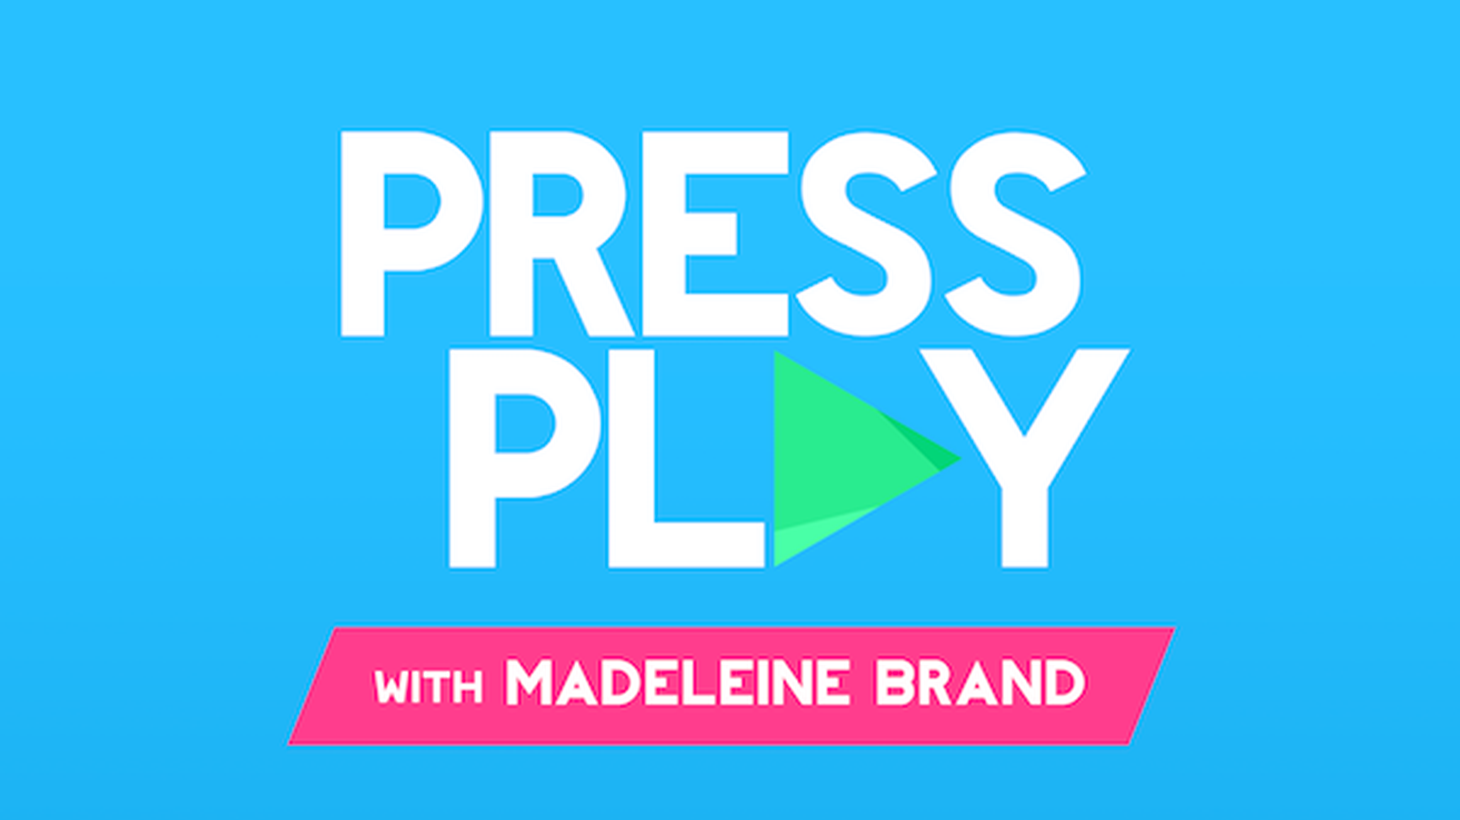 KCRW Press Play’s Madeleine Brand goes head to head with Steve Chiotakis in taking the best Instagram influencer pics.